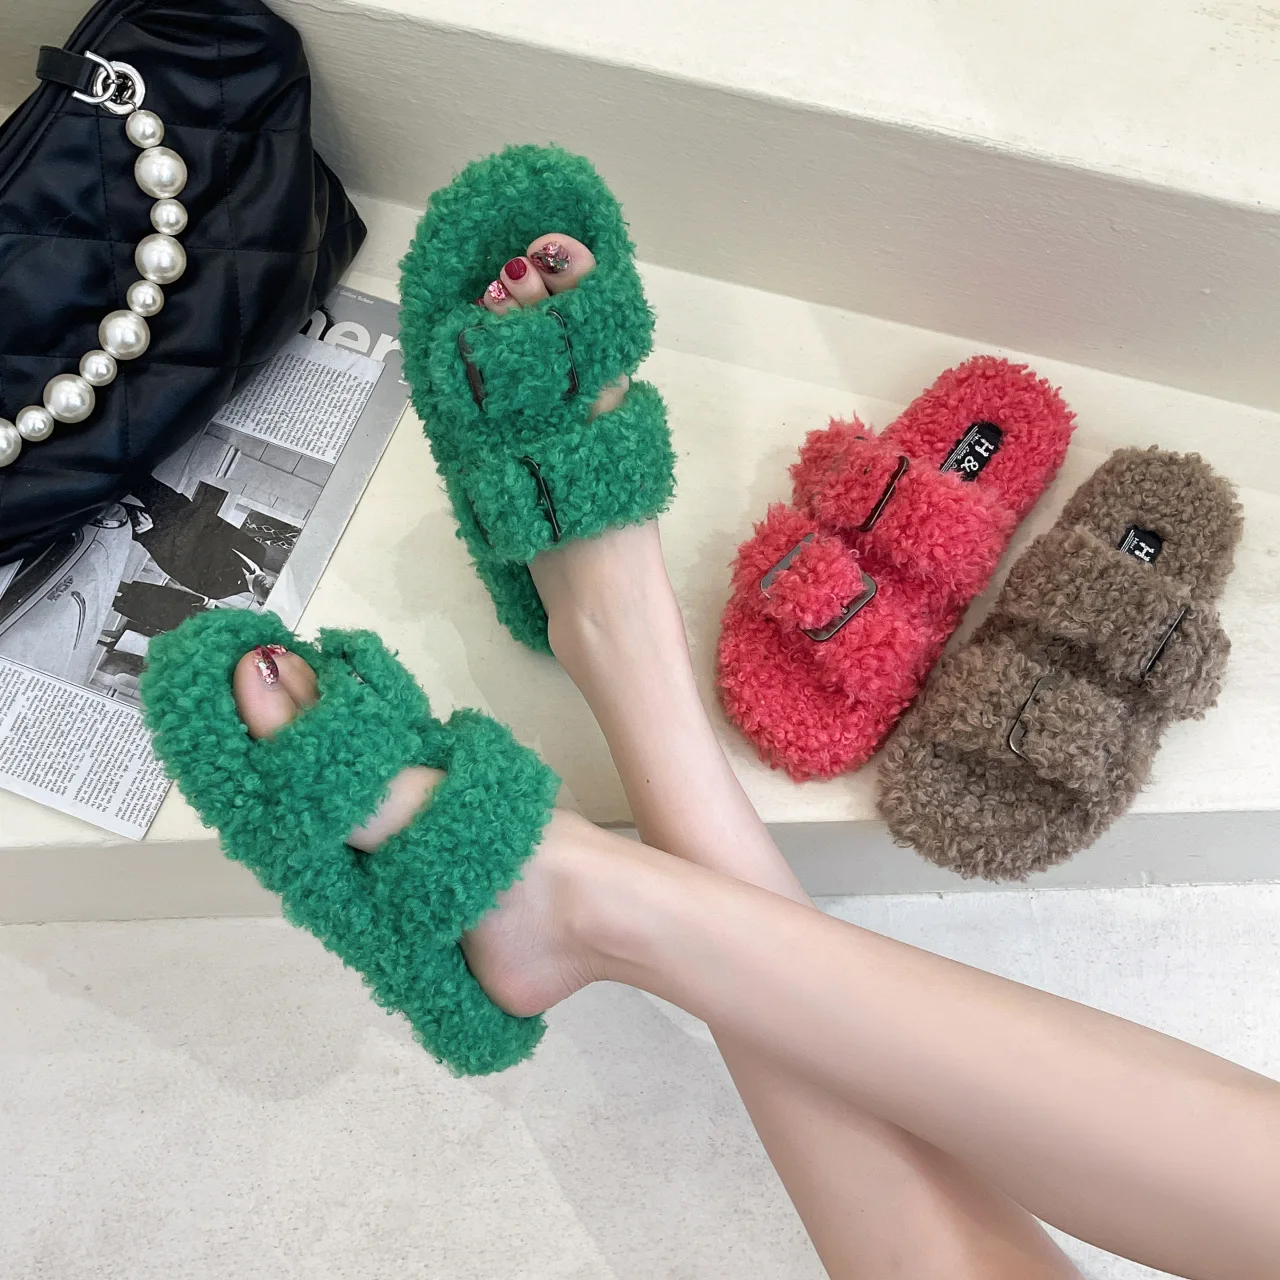 

Large Size 2022 Sandals Clogs With Heel Women's Low Shoes Big New Thick Low-heeled Fur Velvet Girls Fabric Fretwork Rubber Basic